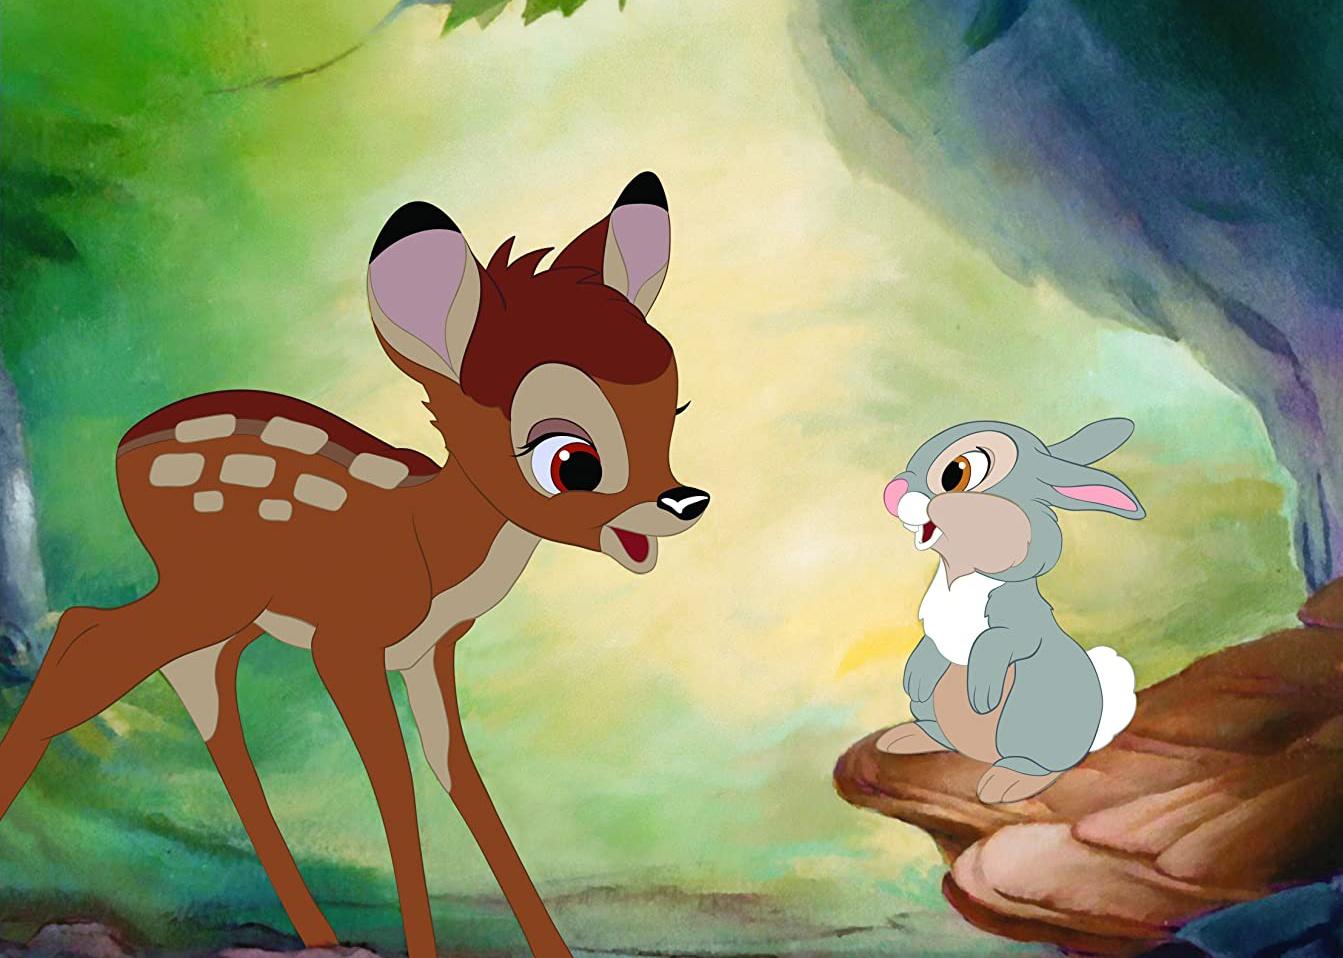 I cannot believe Disney's working on a live-action Bambi movie — this needs  to stop